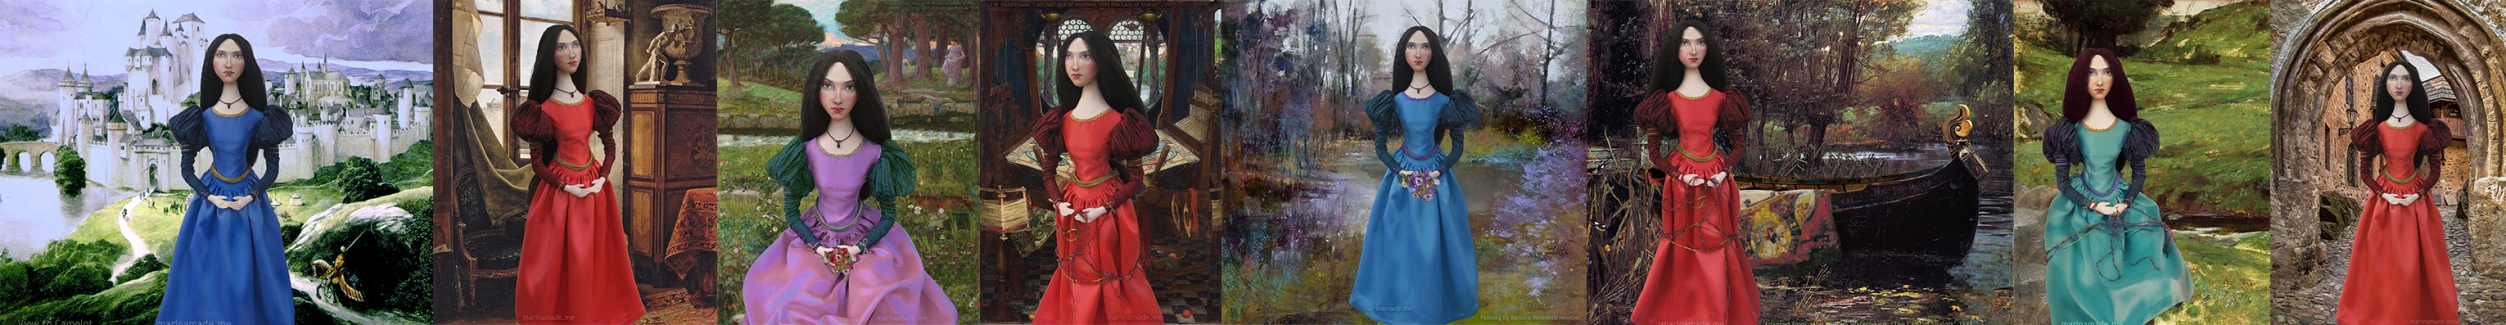 Muses of John William Waterhouse, interpreted by Marina Elphick for Marina's Muses.J.W.Waterhouse models and muses.